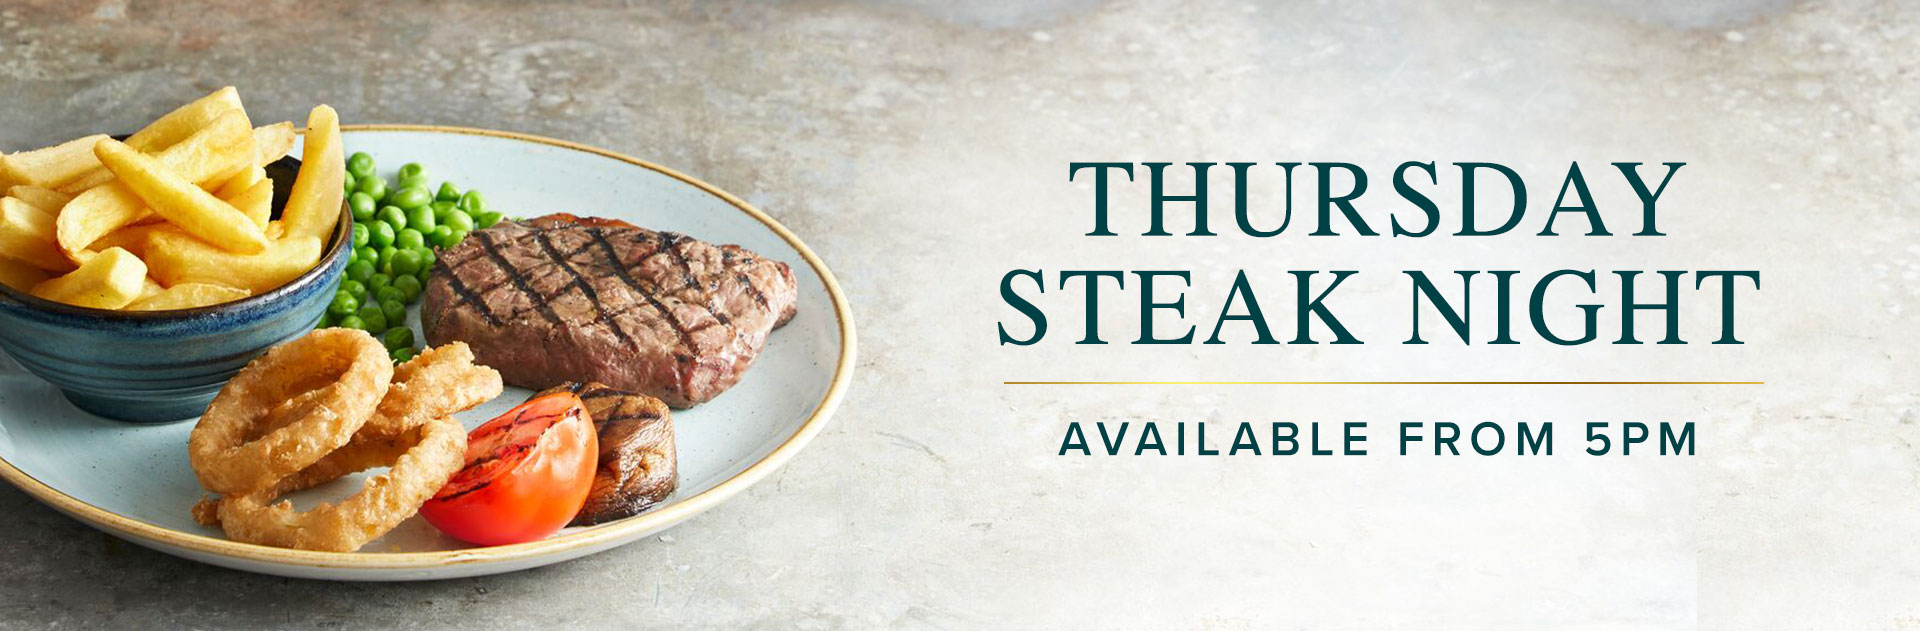 Thursday Steak Night at The Foley Arms